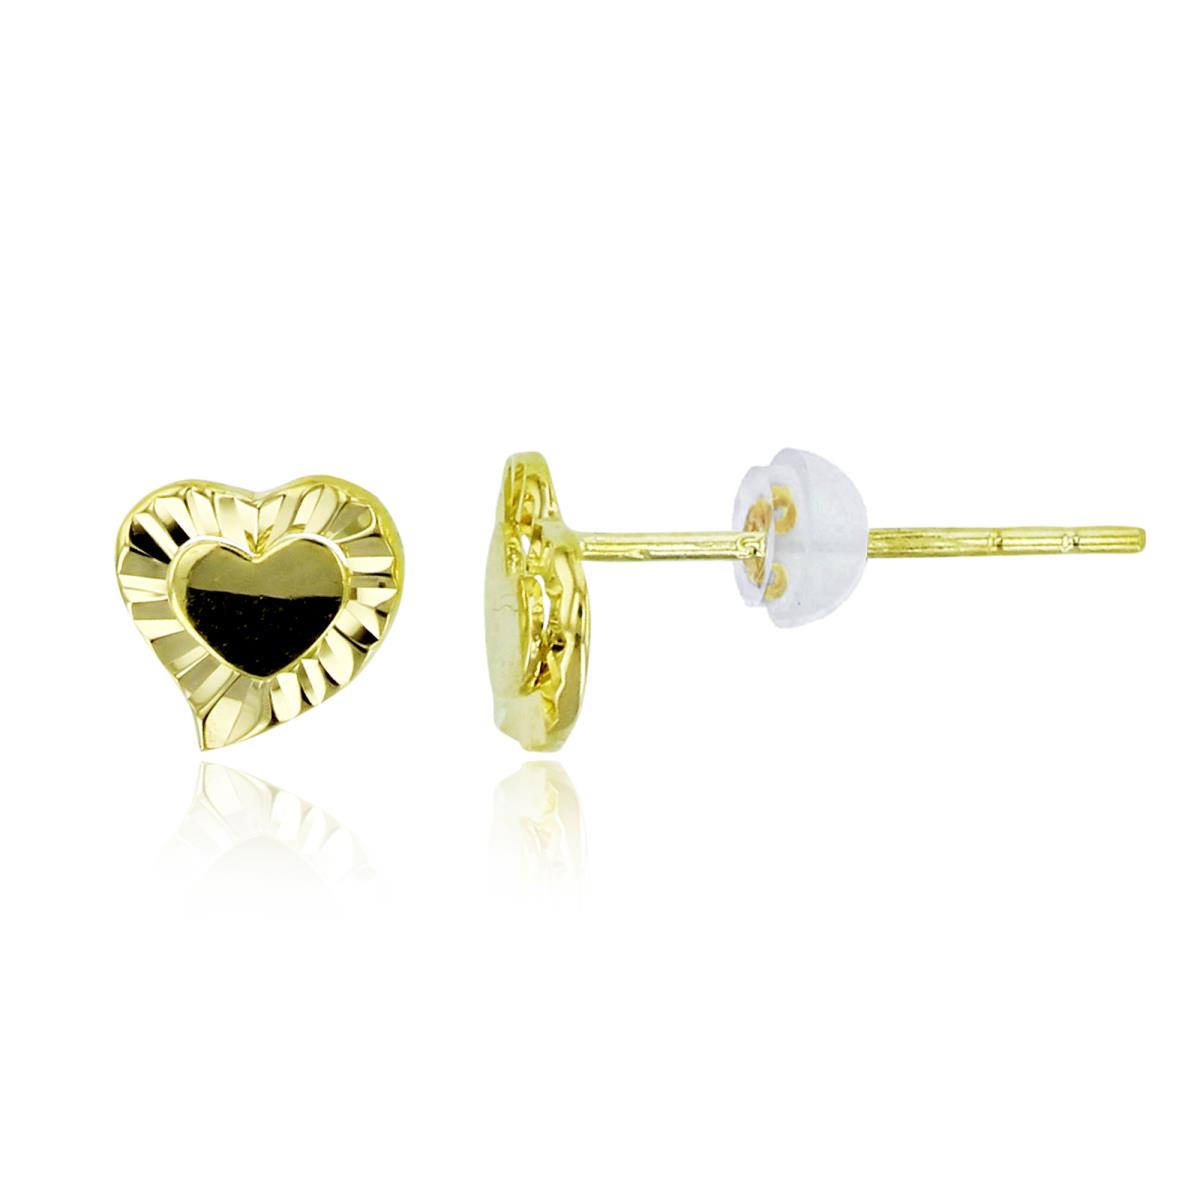 14K Yellow Gold Diamond Cut Heart Studs with Silicon Backs